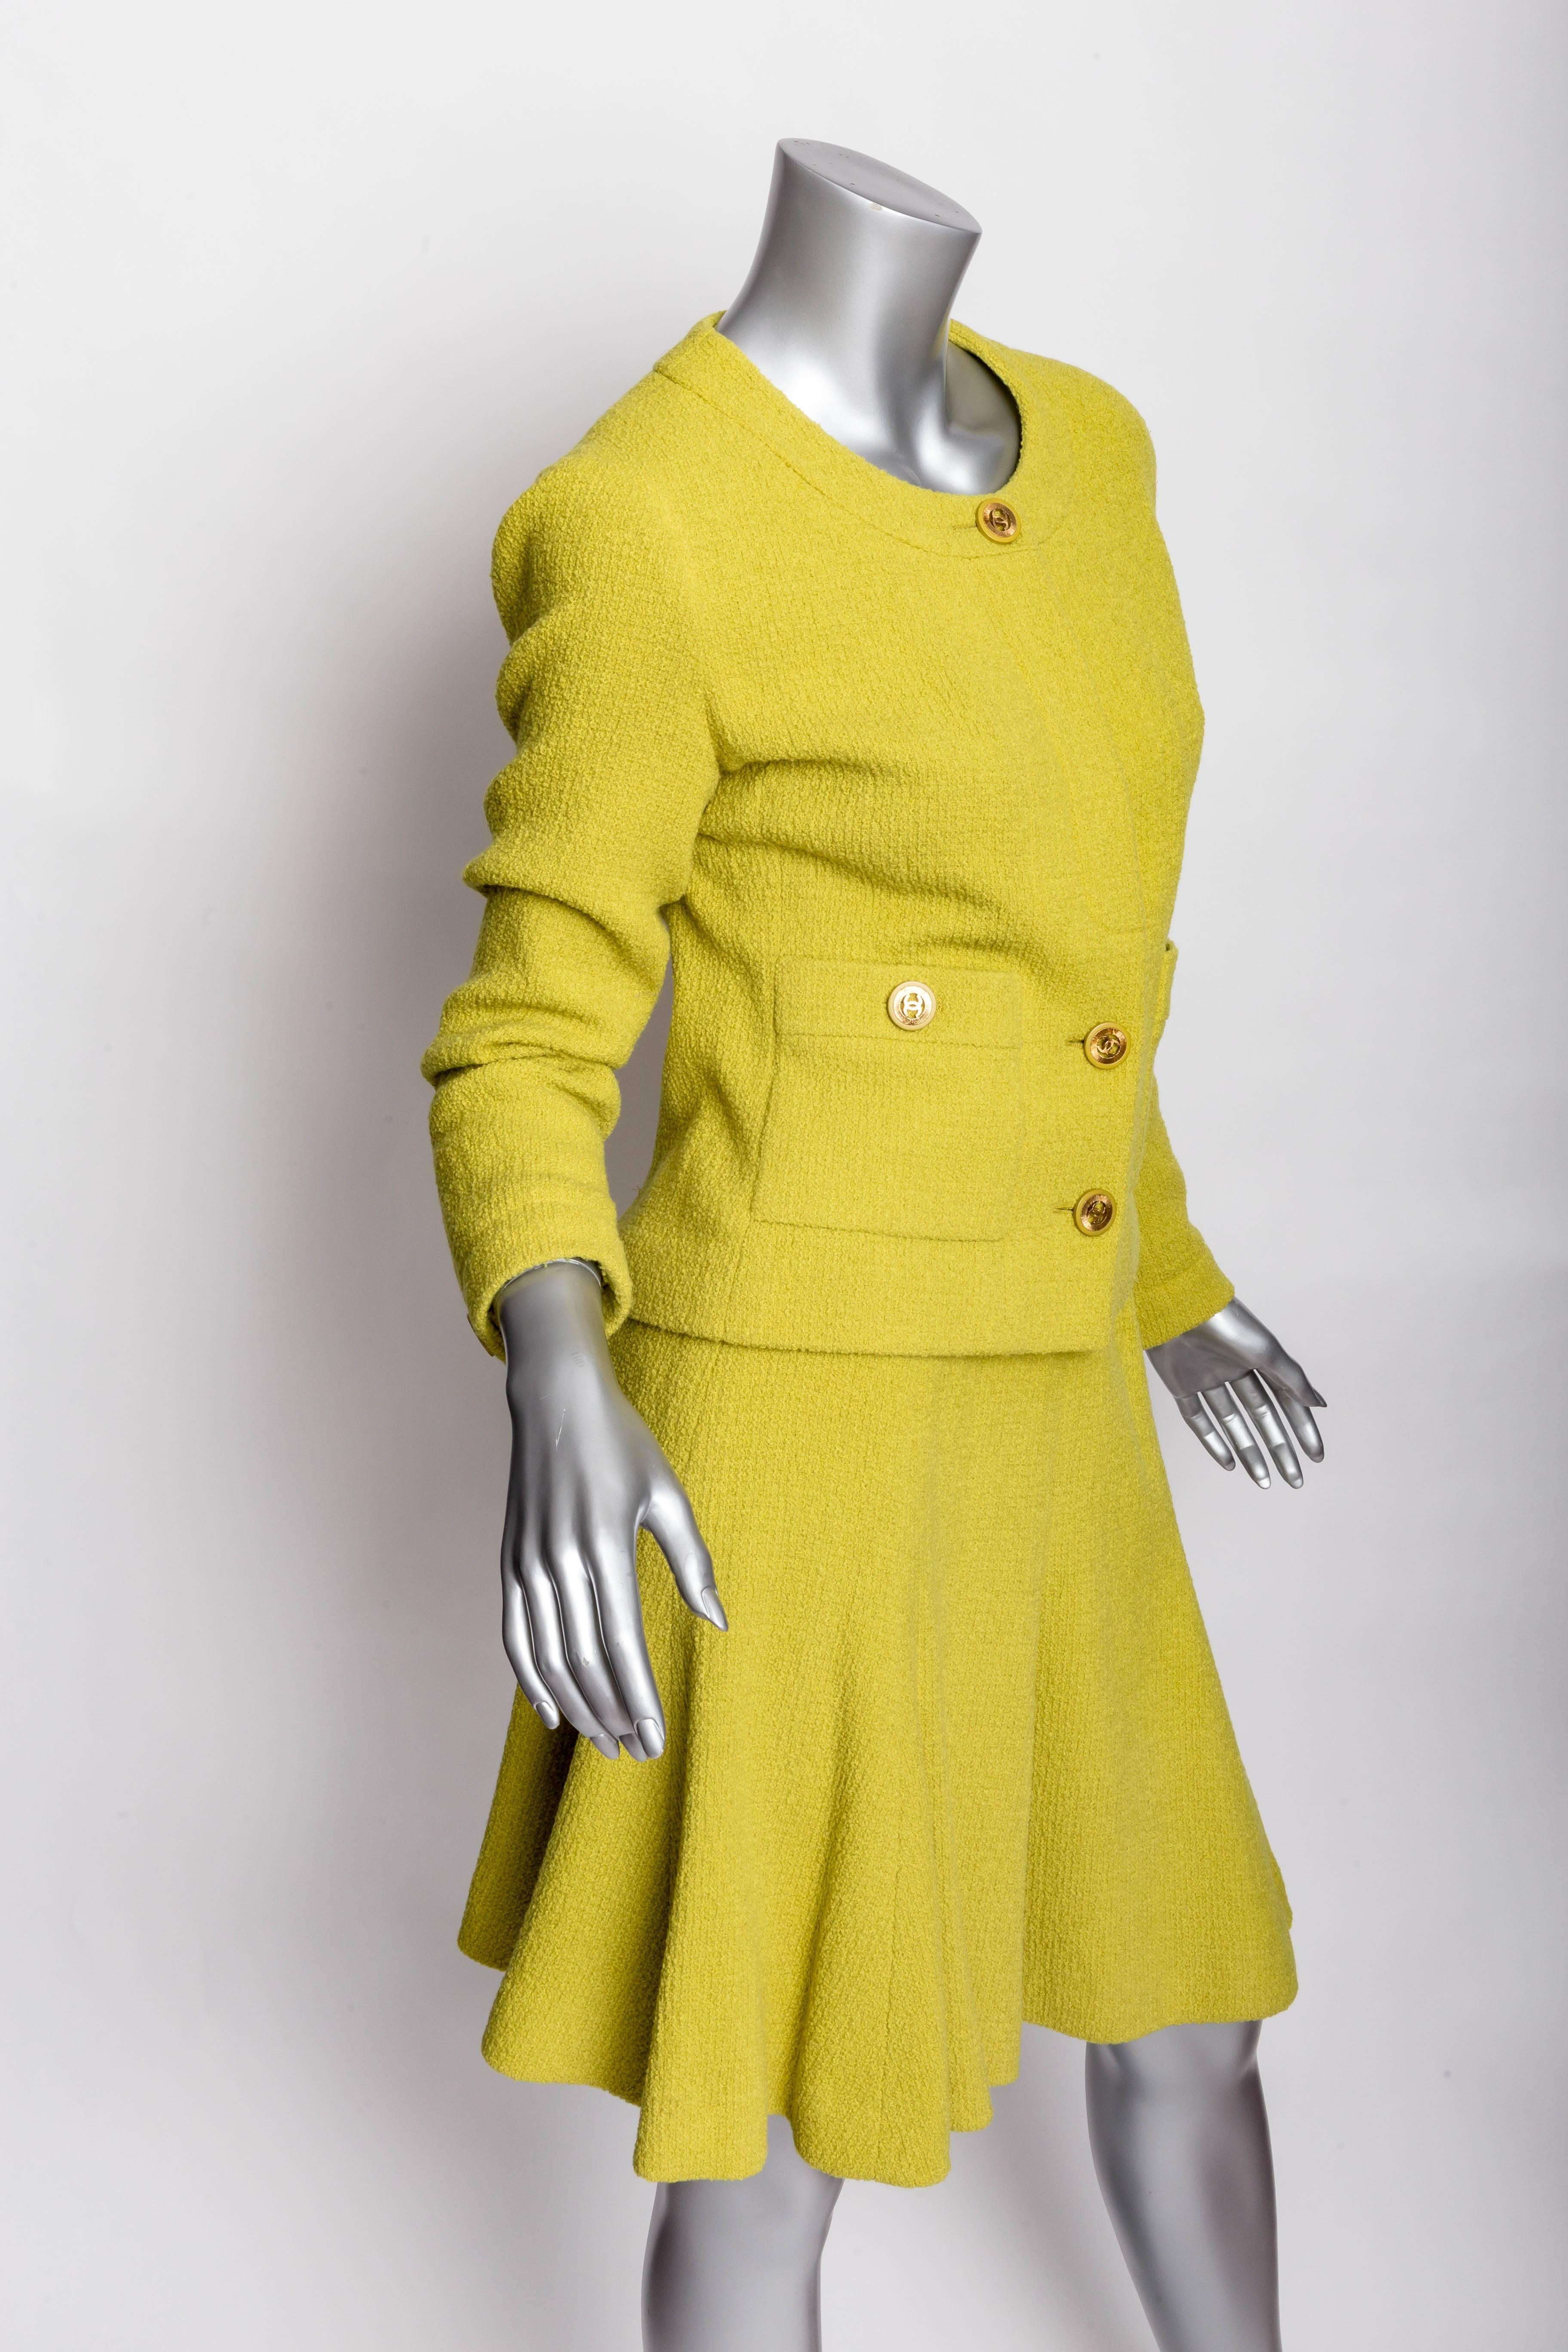 Darling Chanel Suit in Chartreuse Wool Bloucle. Size 36.
Round neck collar Jacket with Chanel gold buttons down the front of the jacket (three exposed and two  hidden) as well as gold Chanel buttons on the two front pockets and at the end of each